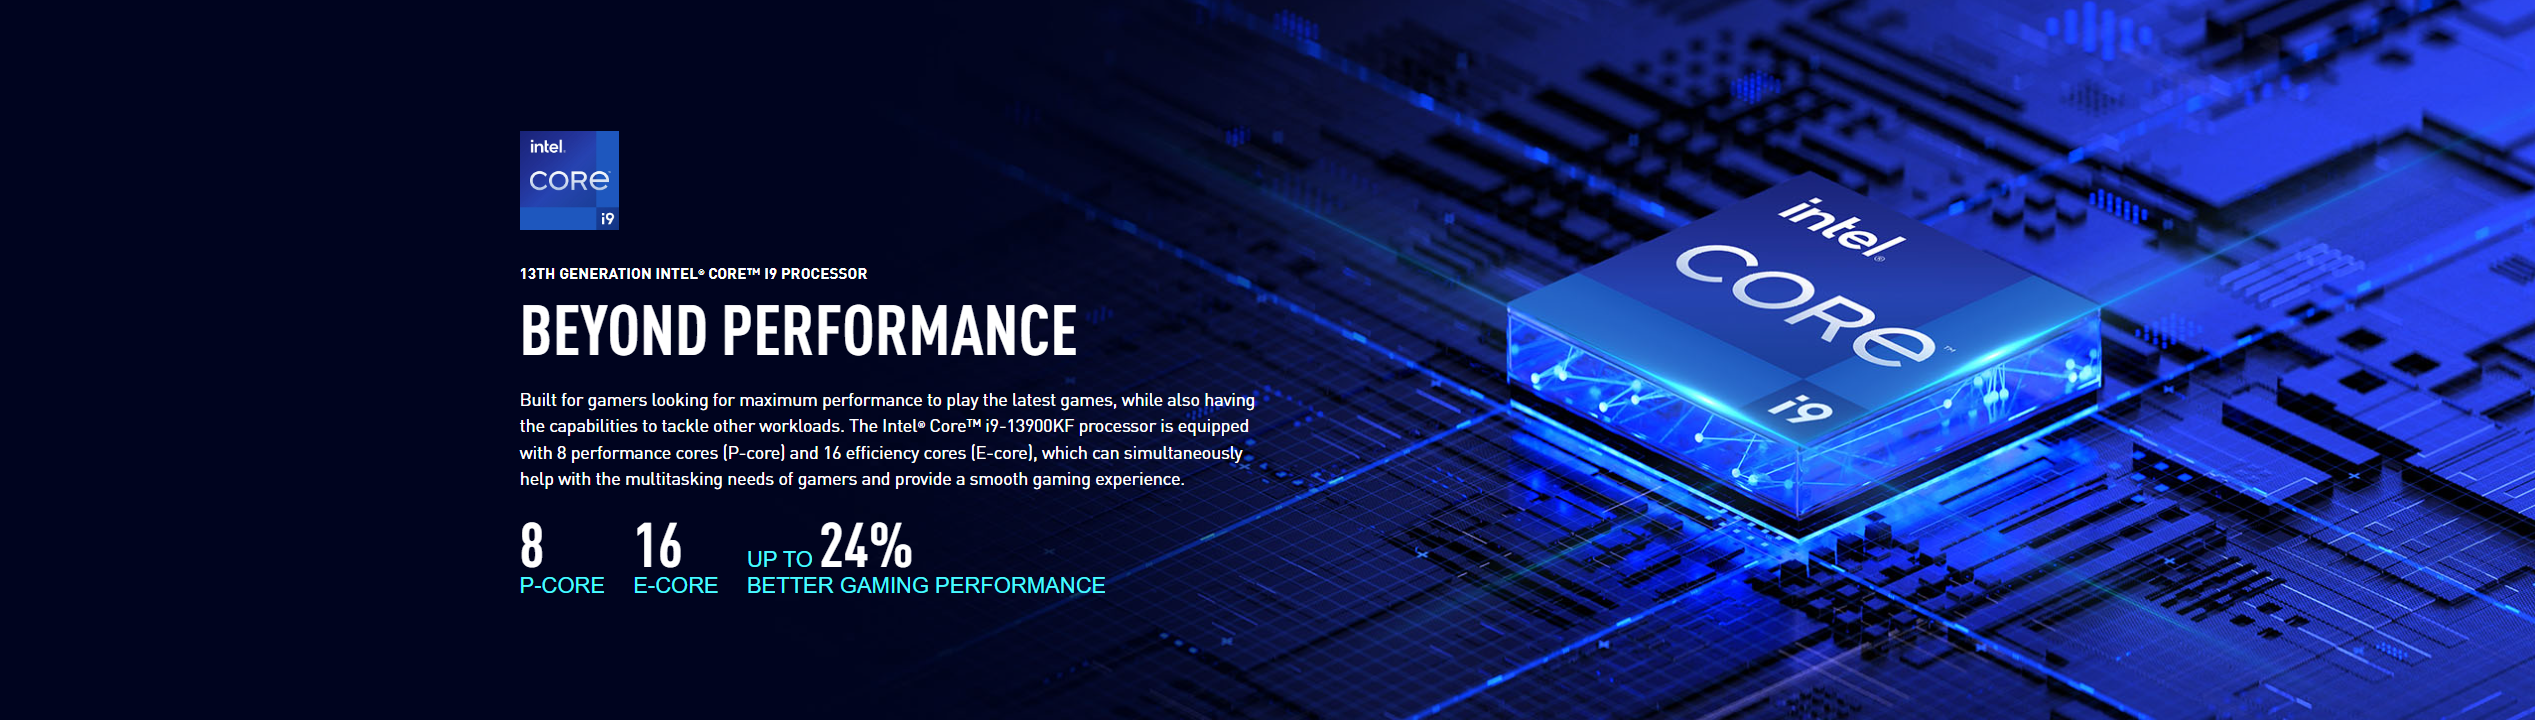 The Intel Core i9-13900KF processor is designed to meet the demands of gamers seeking high performance for playing the latest games, as well as handling other tasks efficiently. It features 8 powerful performance cores (P-core) and 16 efficient cores (E-core), enabling seamless multitasking for gamers and delivering an enhanced gaming experience. With up to 24% improved gaming performance, this processor provides exceptional power for gamers.